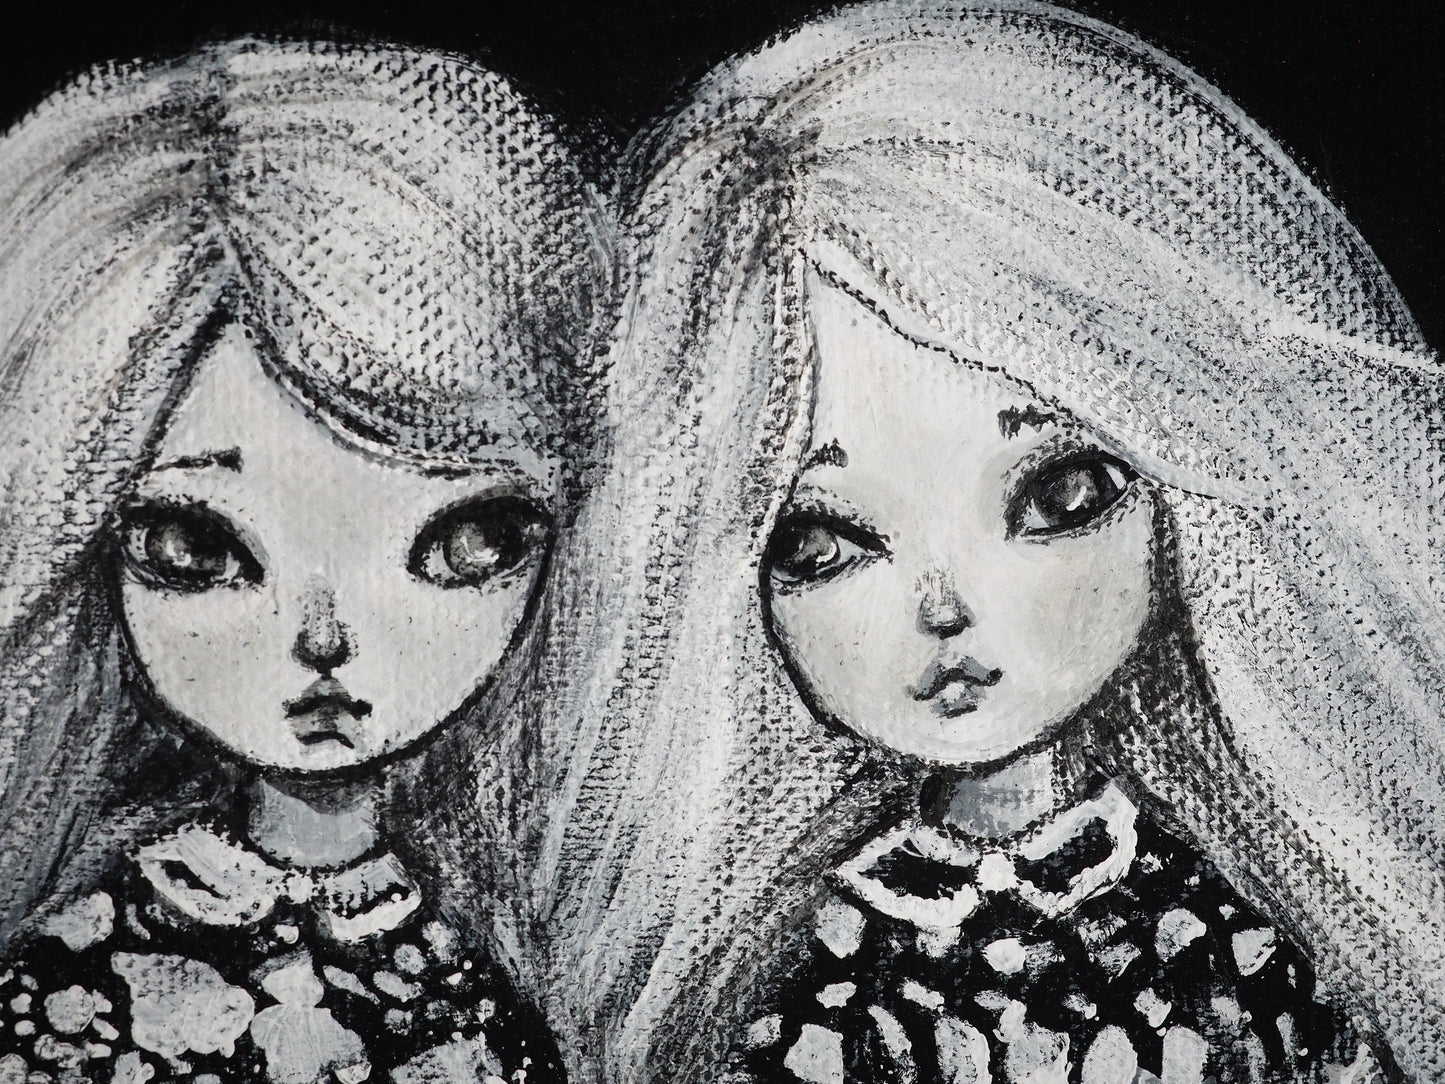 Two sisters travel the afterlife in ghost world on this amazing mixed media Halloween painting by Danita Art. The surreal link between twin girls and their spirits keeping together in afterlife make up for a beautiful monochrome original painting by Danita Art.